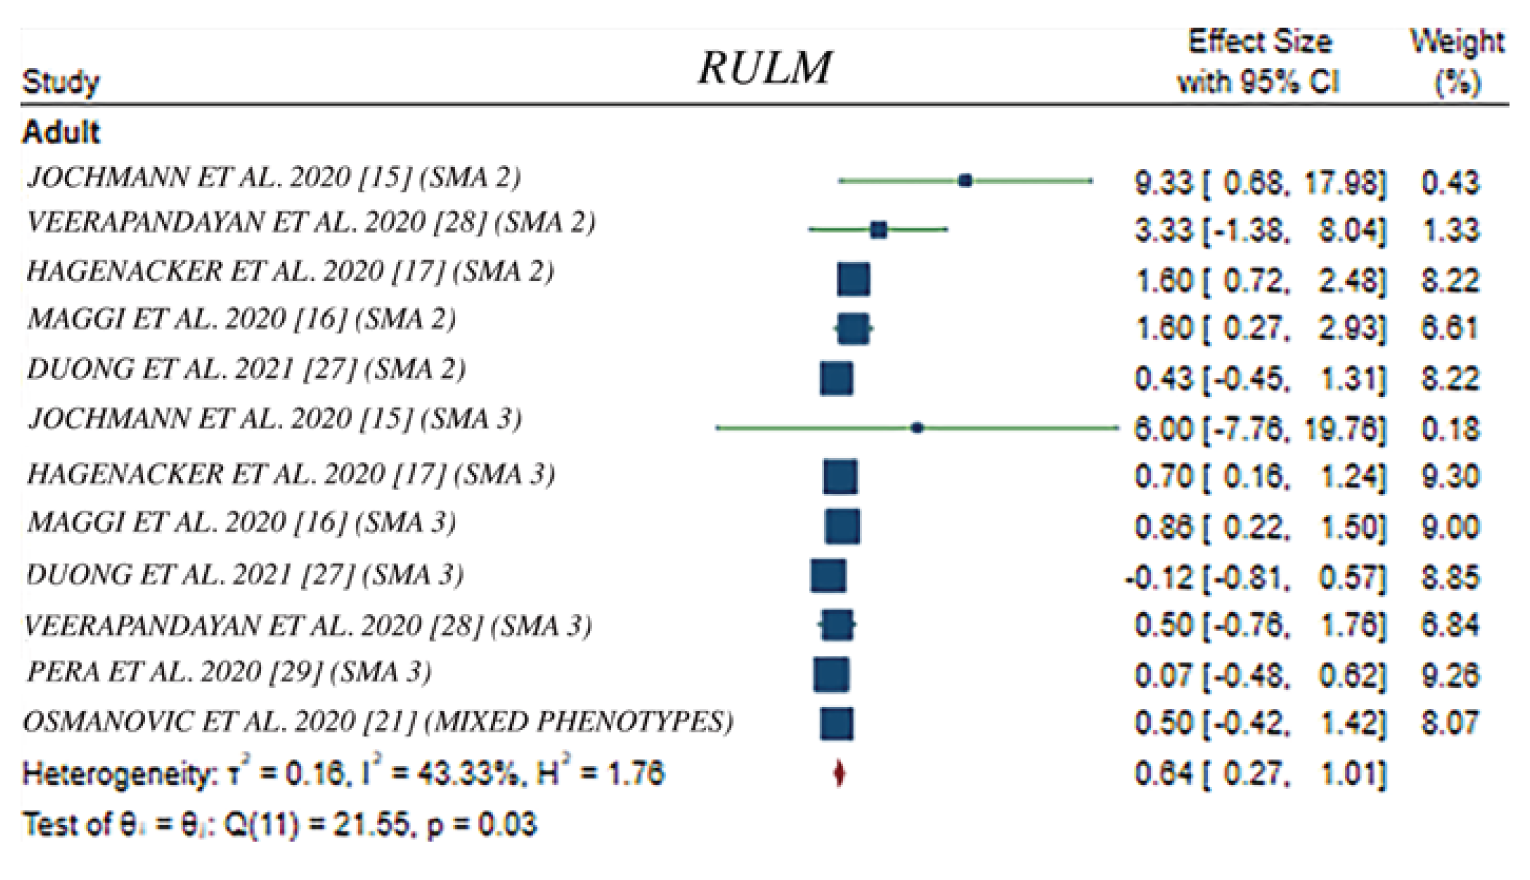 Forest plot of the meta-regression analysis for the mean change in RULM score in adults in included studies. A total of 7 studies were included. The pooled mean change in RULM score across studies was 0.64 points (95% CI, 0.27 to 1.01).